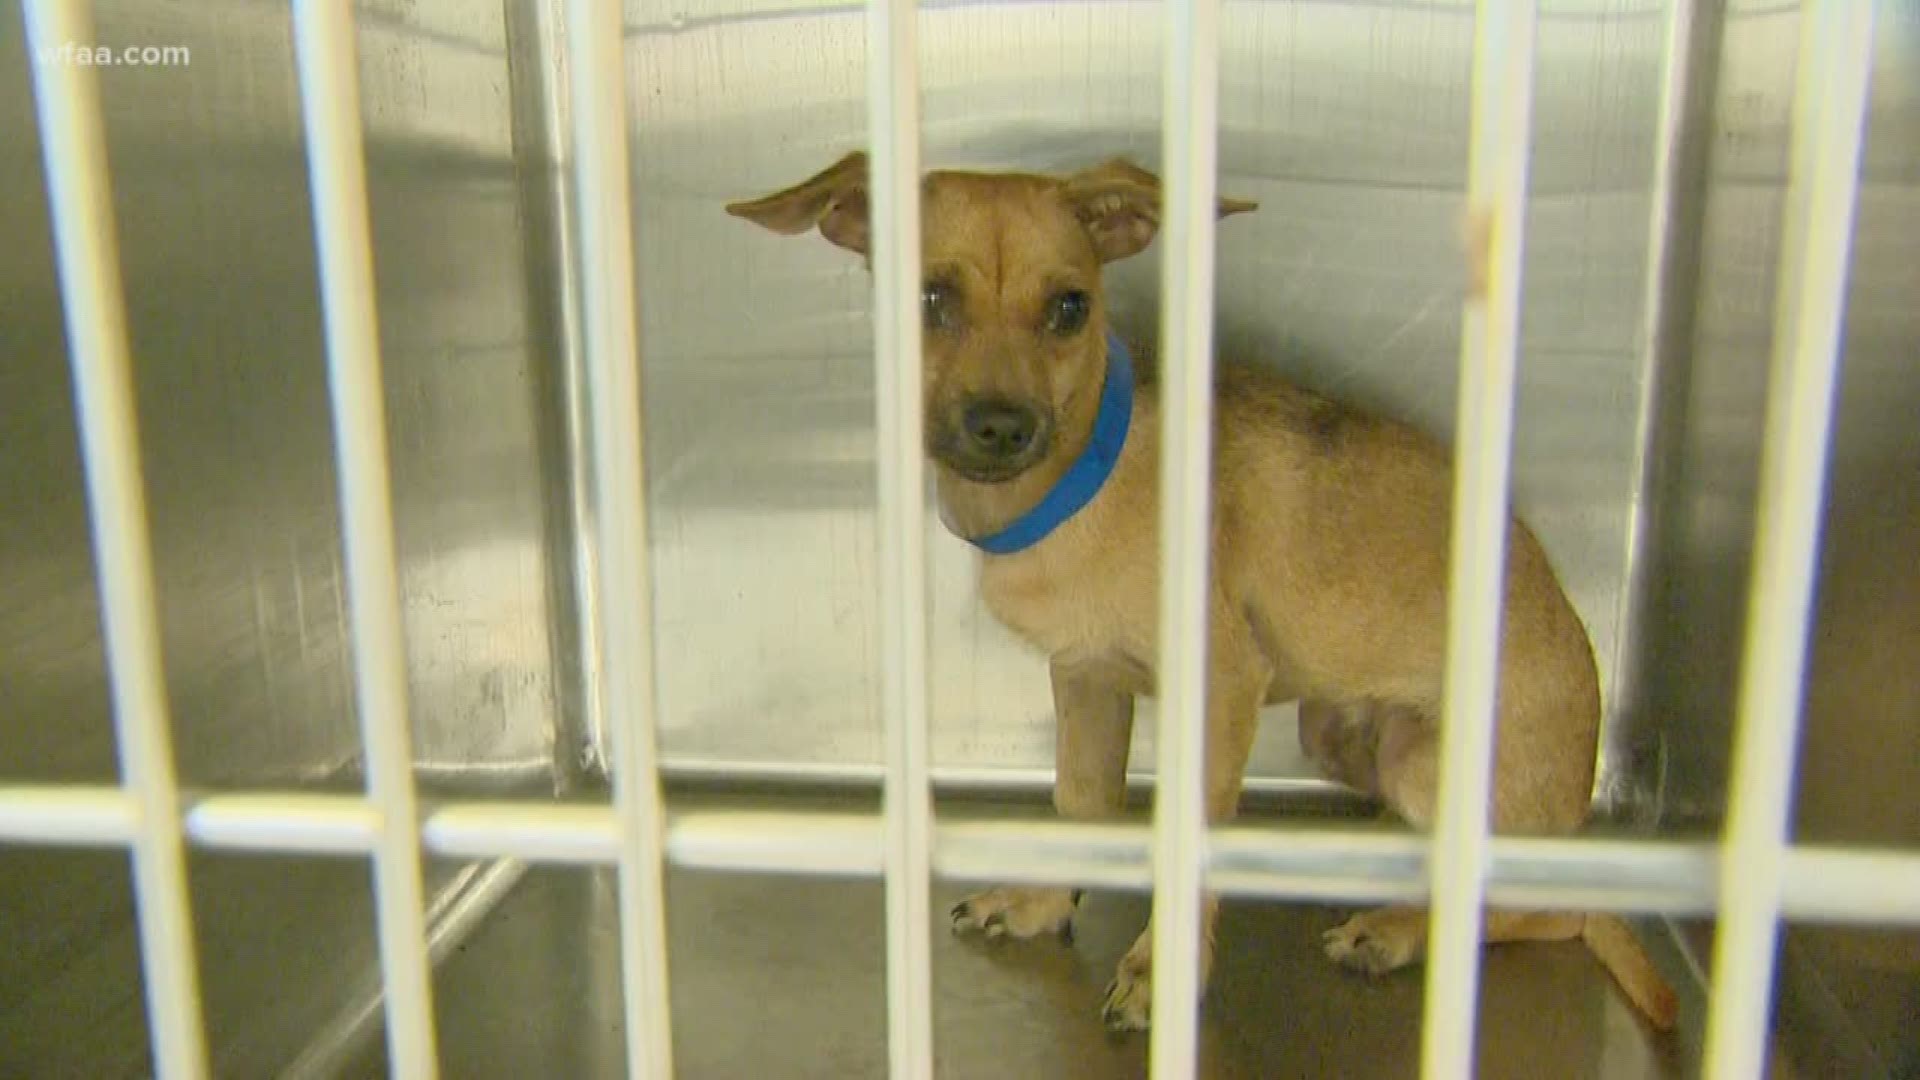 Fort Worth shelter took in 266 animals in just four days. Shelter officials said the pets were given up by their owners.